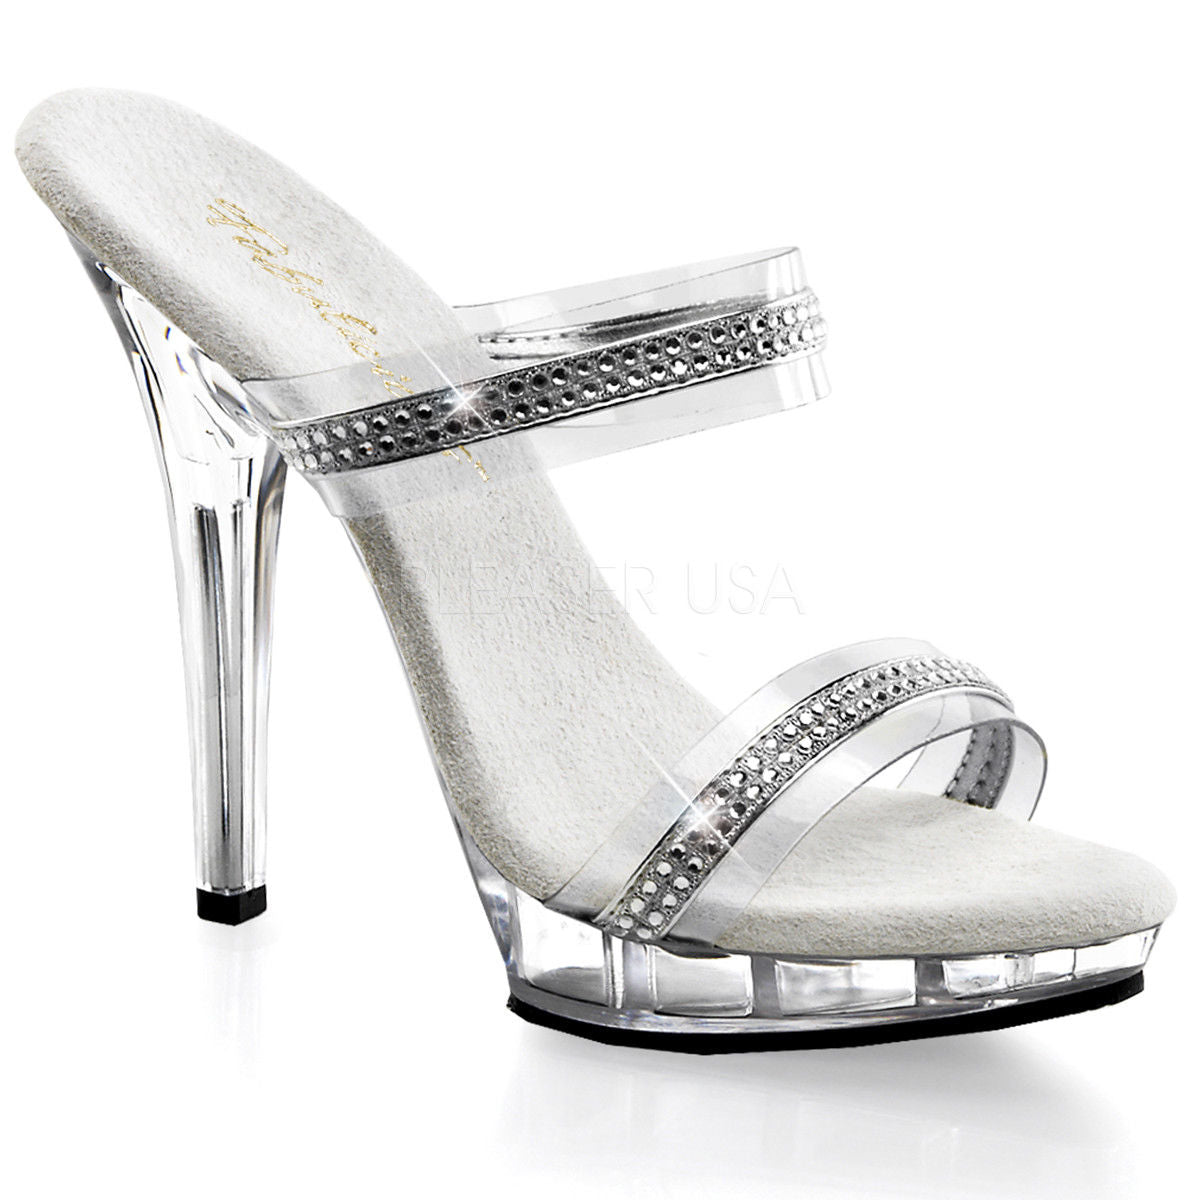 FABULICIOUS Lip-102-2 Clear Rhinestone Double Straps Dress Party Slides 5" Heels - A Shoe Addiction